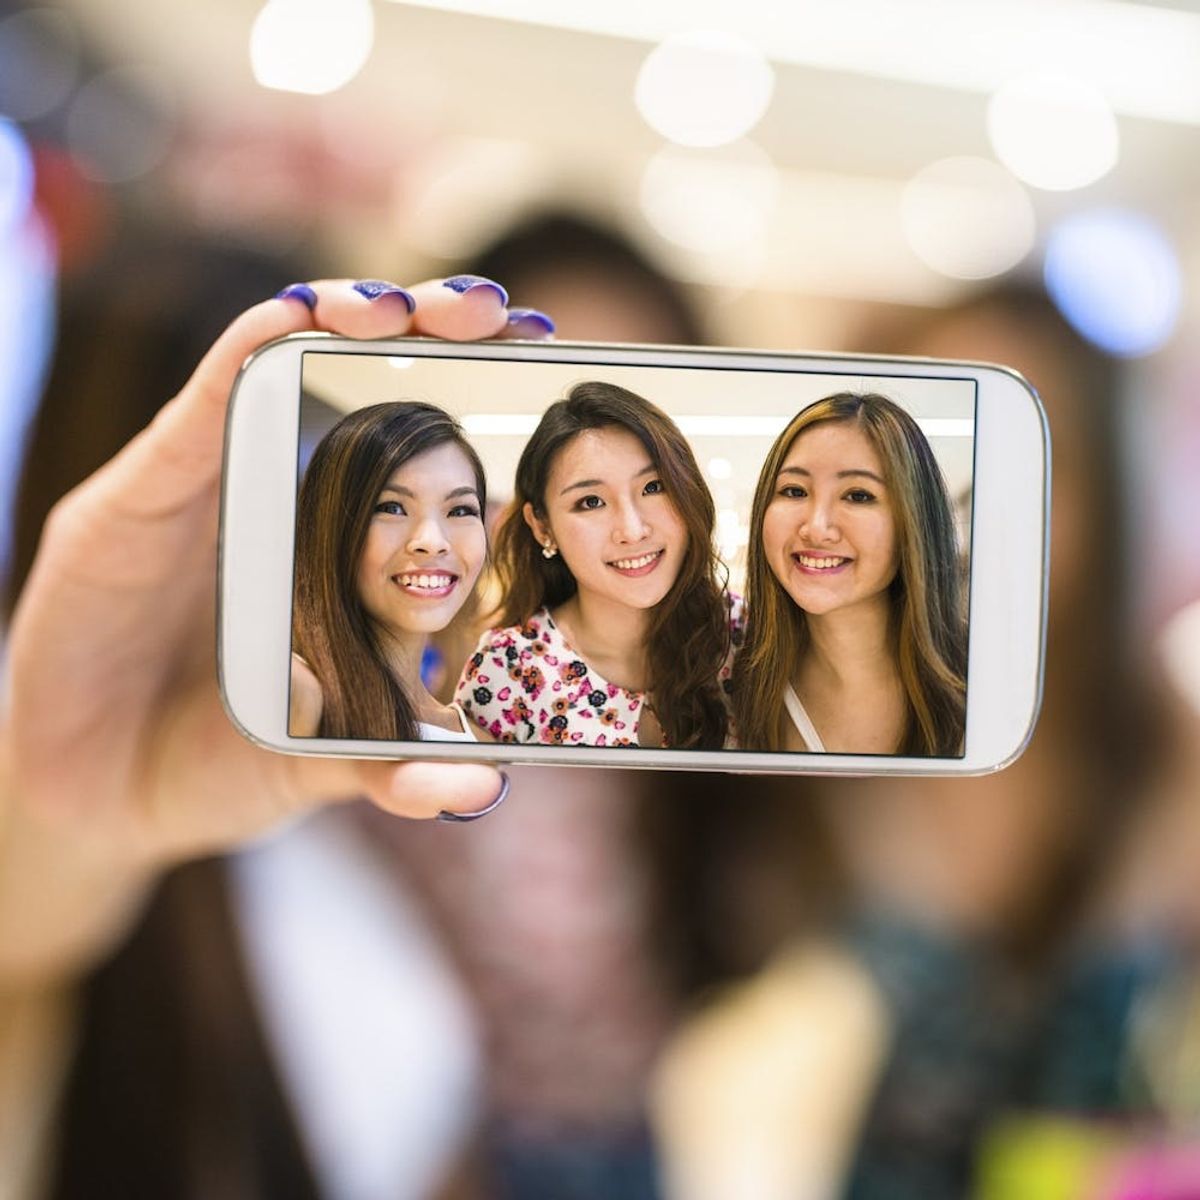 The Average Millennial Spends This Much Time Taking Selfies Each Week